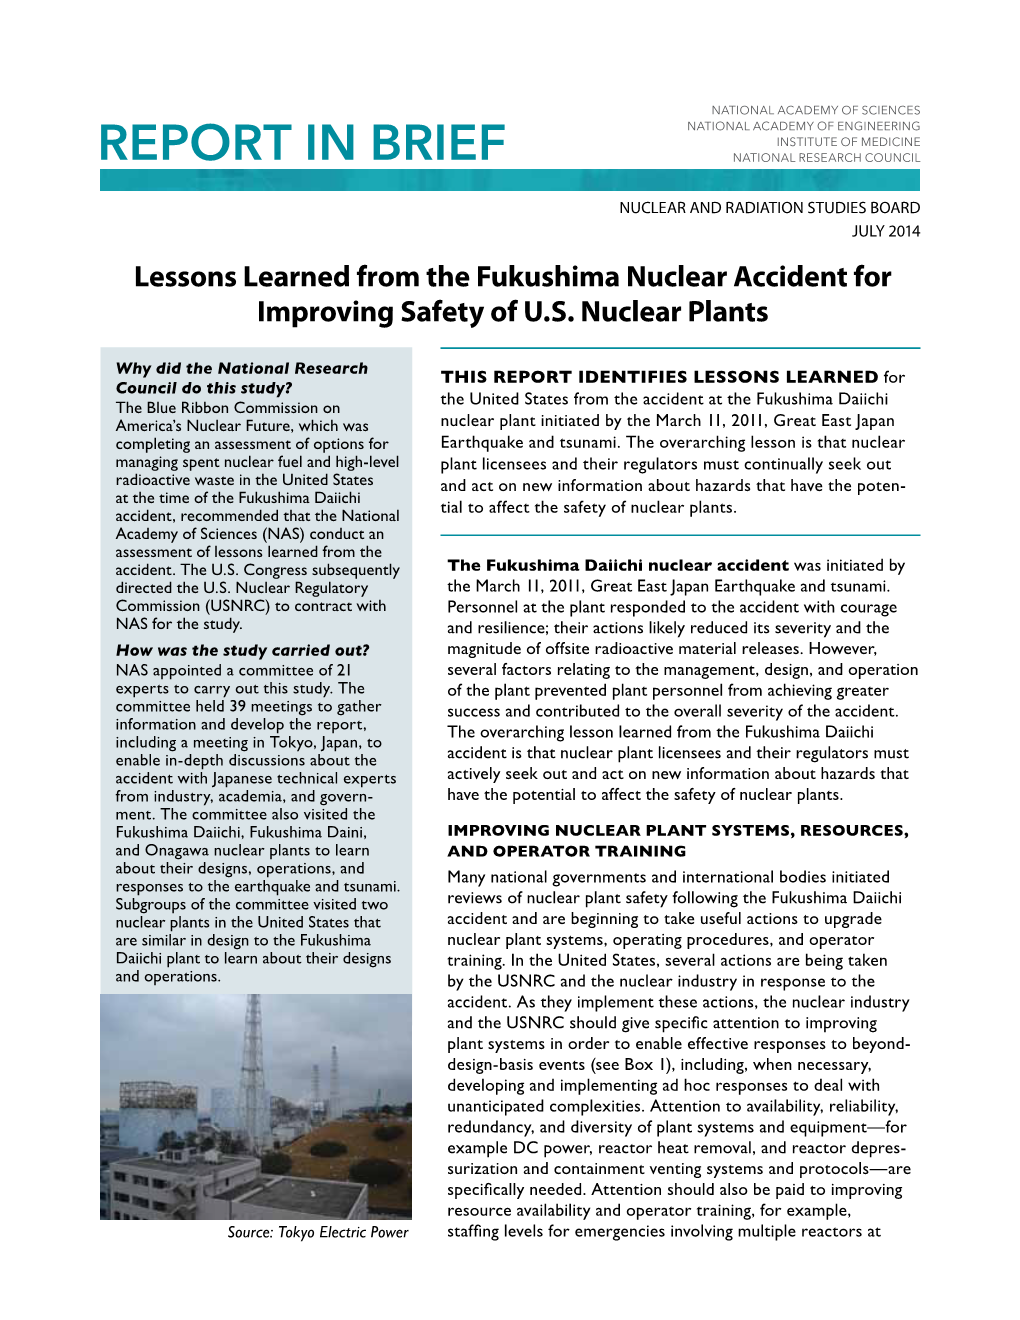 Lessons Learned from the Fukushima Nuclear Accident for Improving Safety of U.S